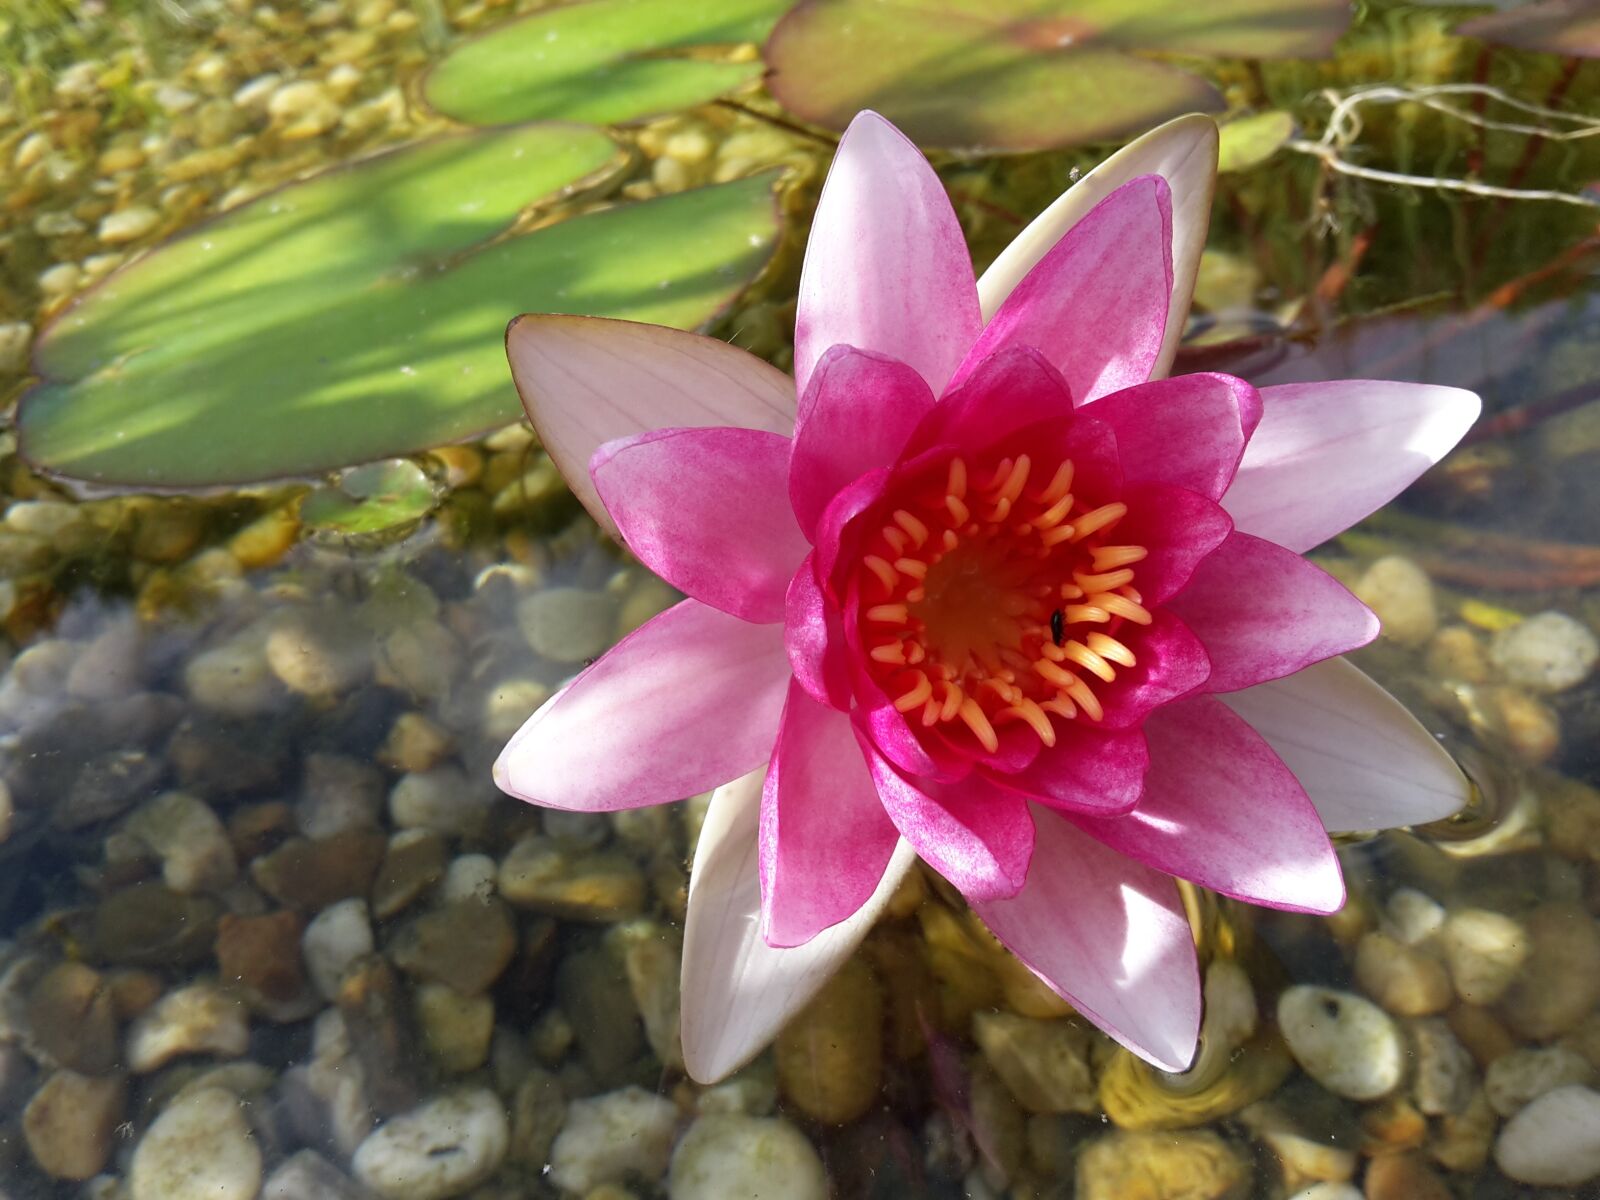 Samsung Galaxy S5 Mini sample photo. Pond, summer, water lily photography